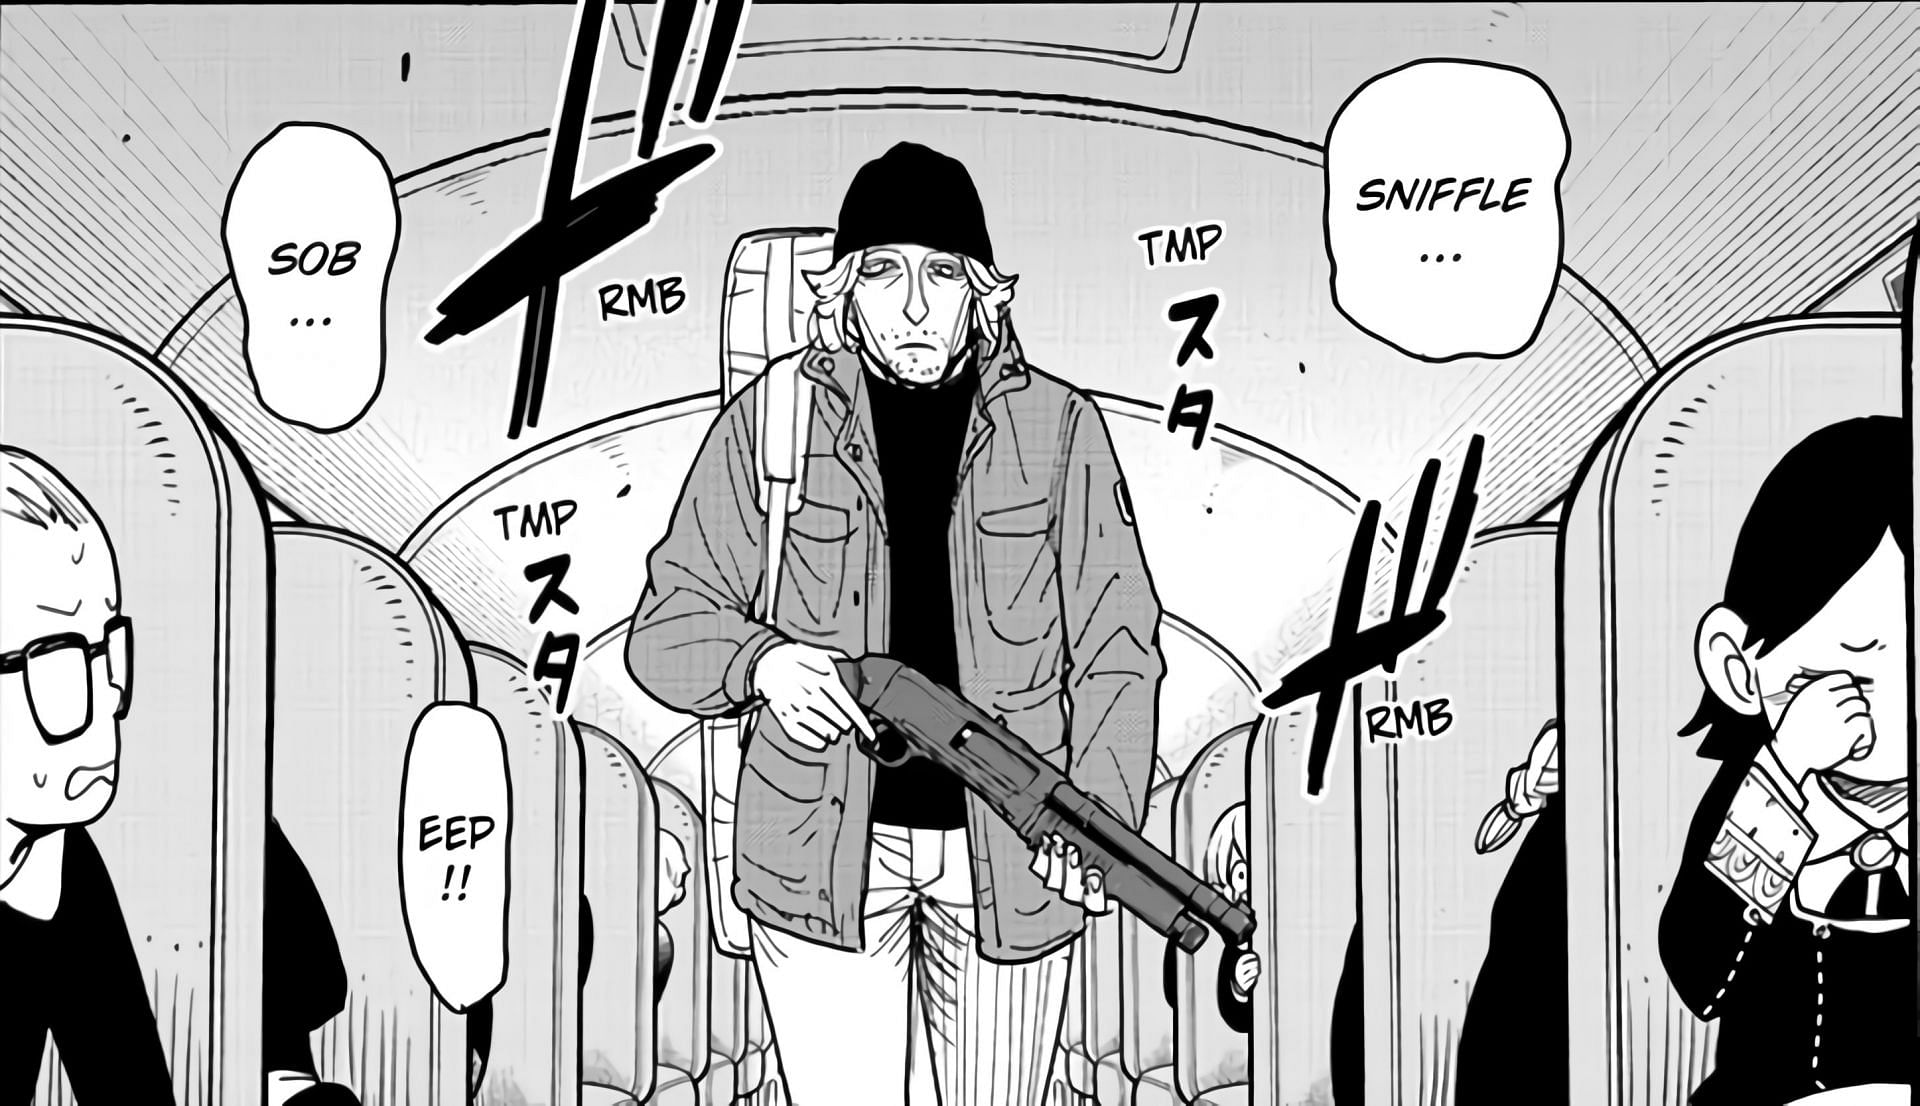 Billy Squire in Spy X Family chapter 70 (Image via Shueisha)